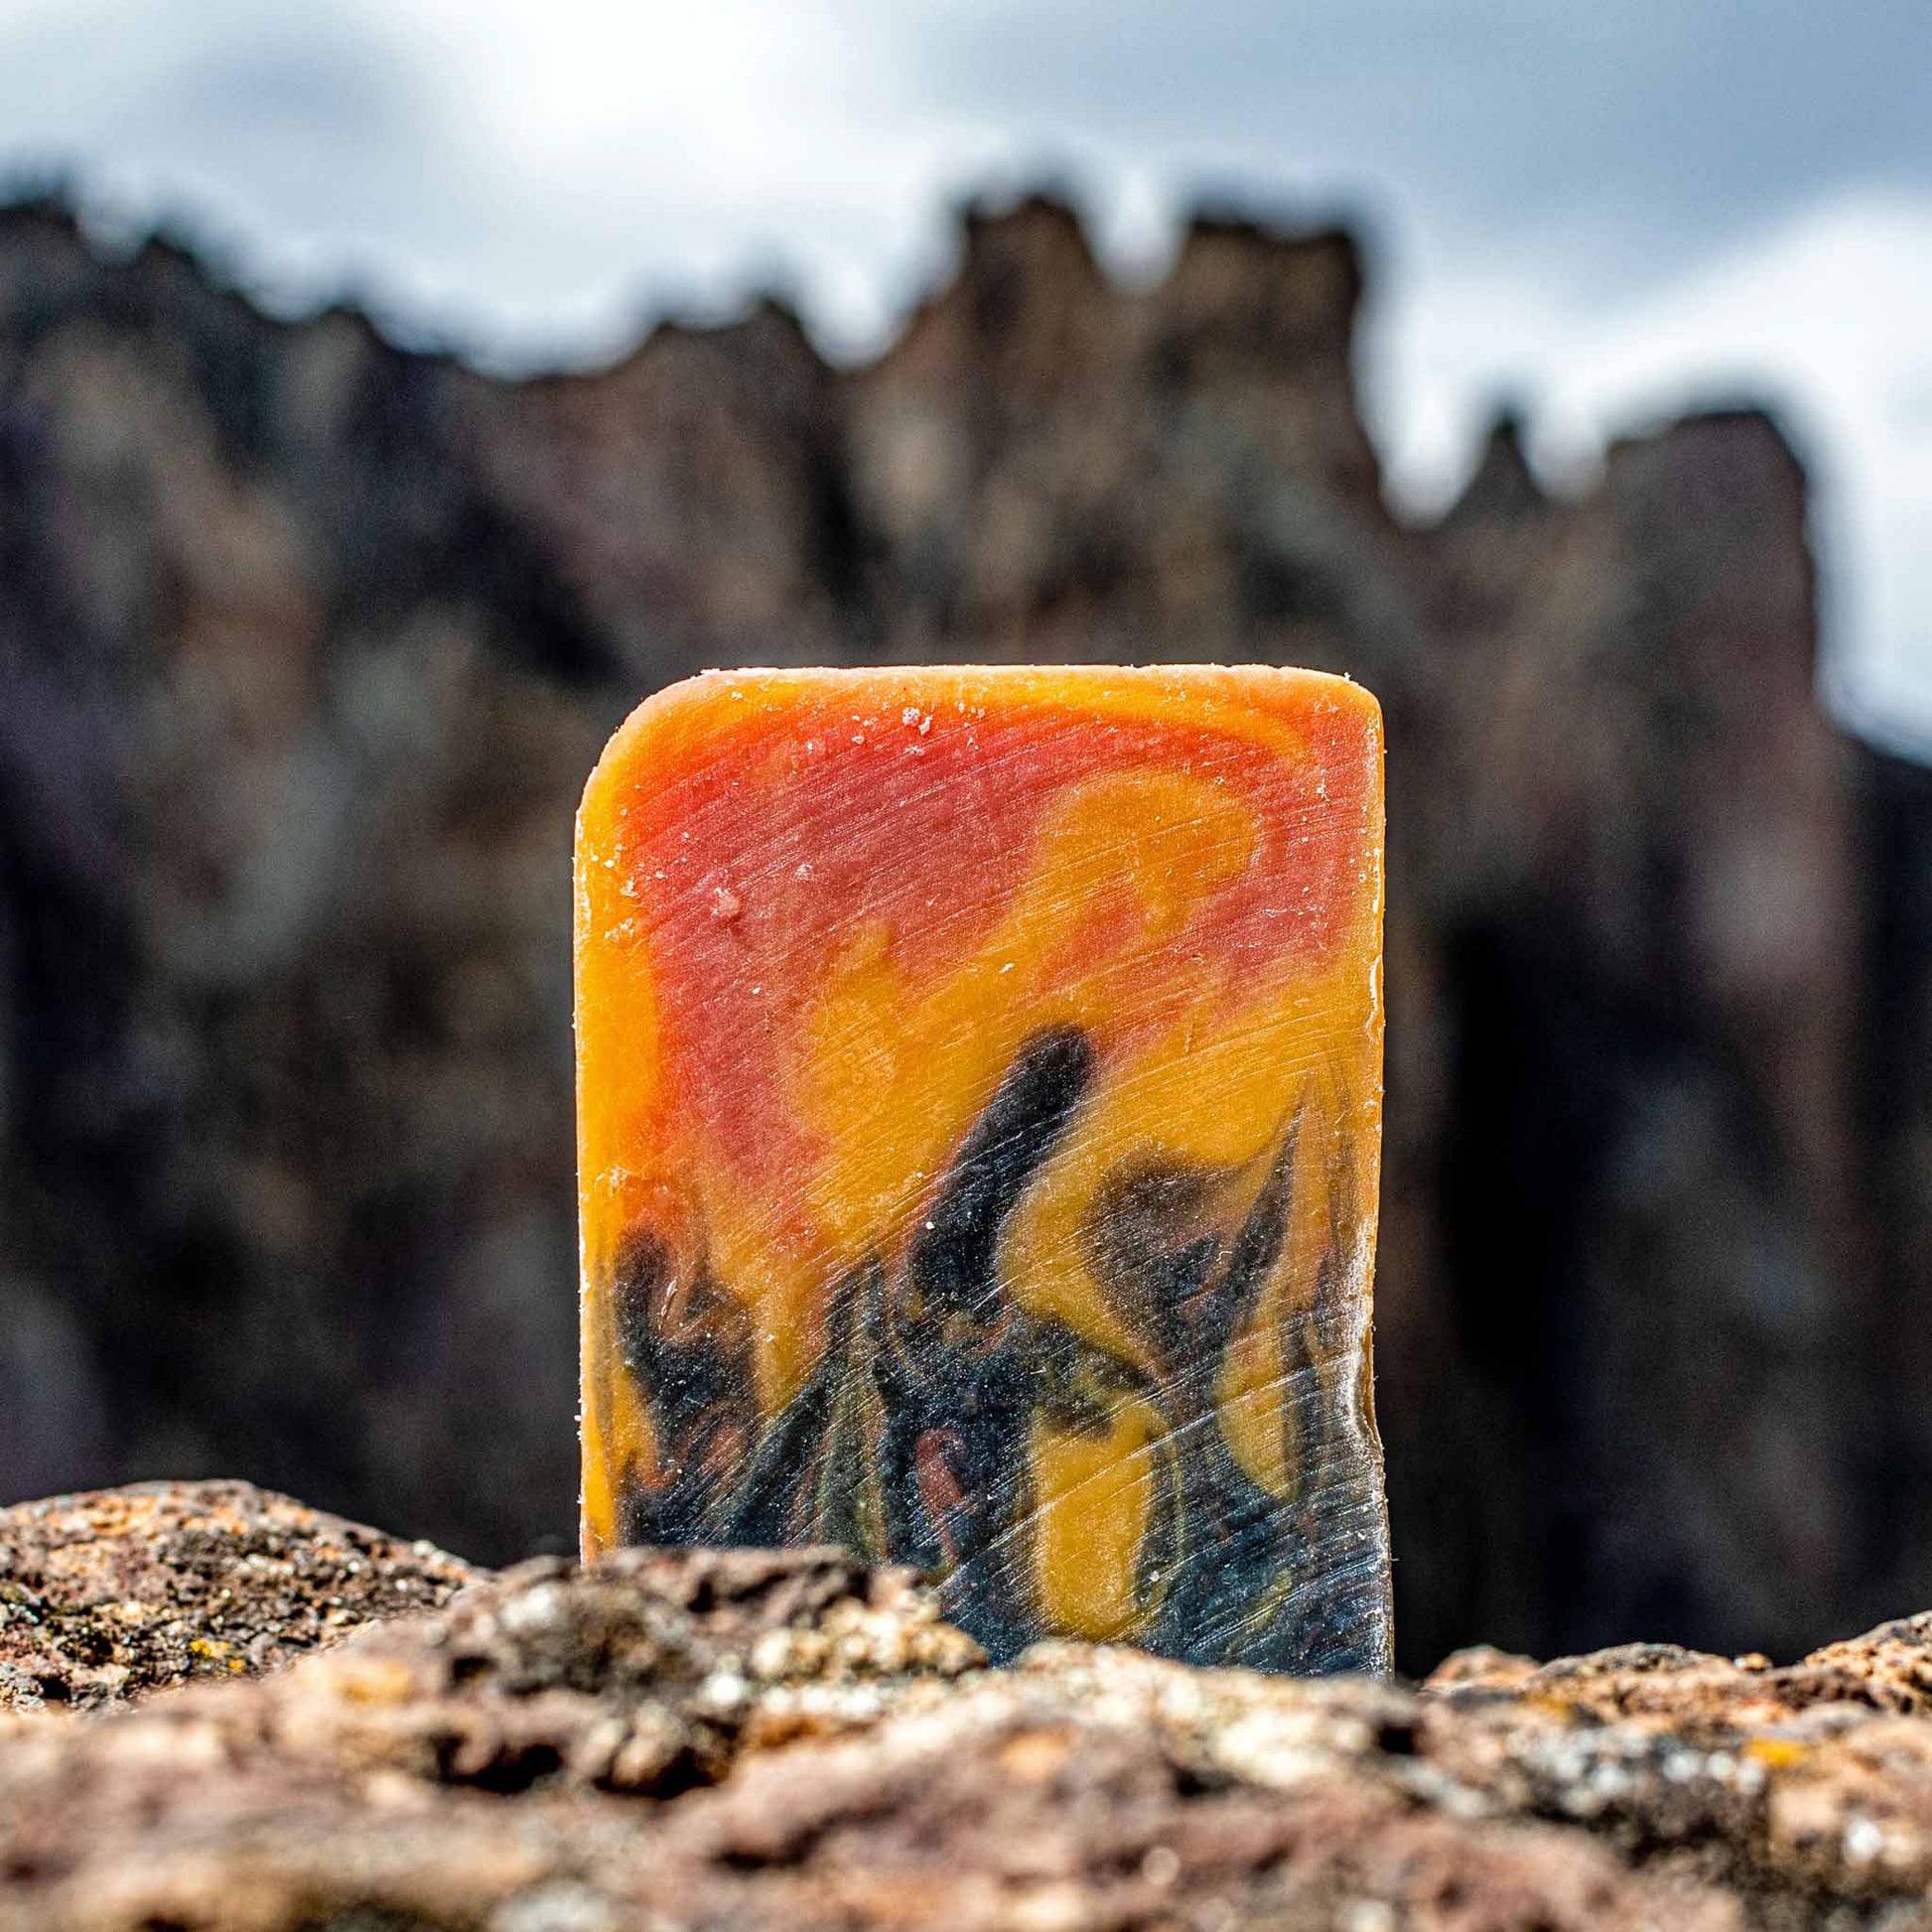 Outlaw natural bar soap with Fire in the Hole scent